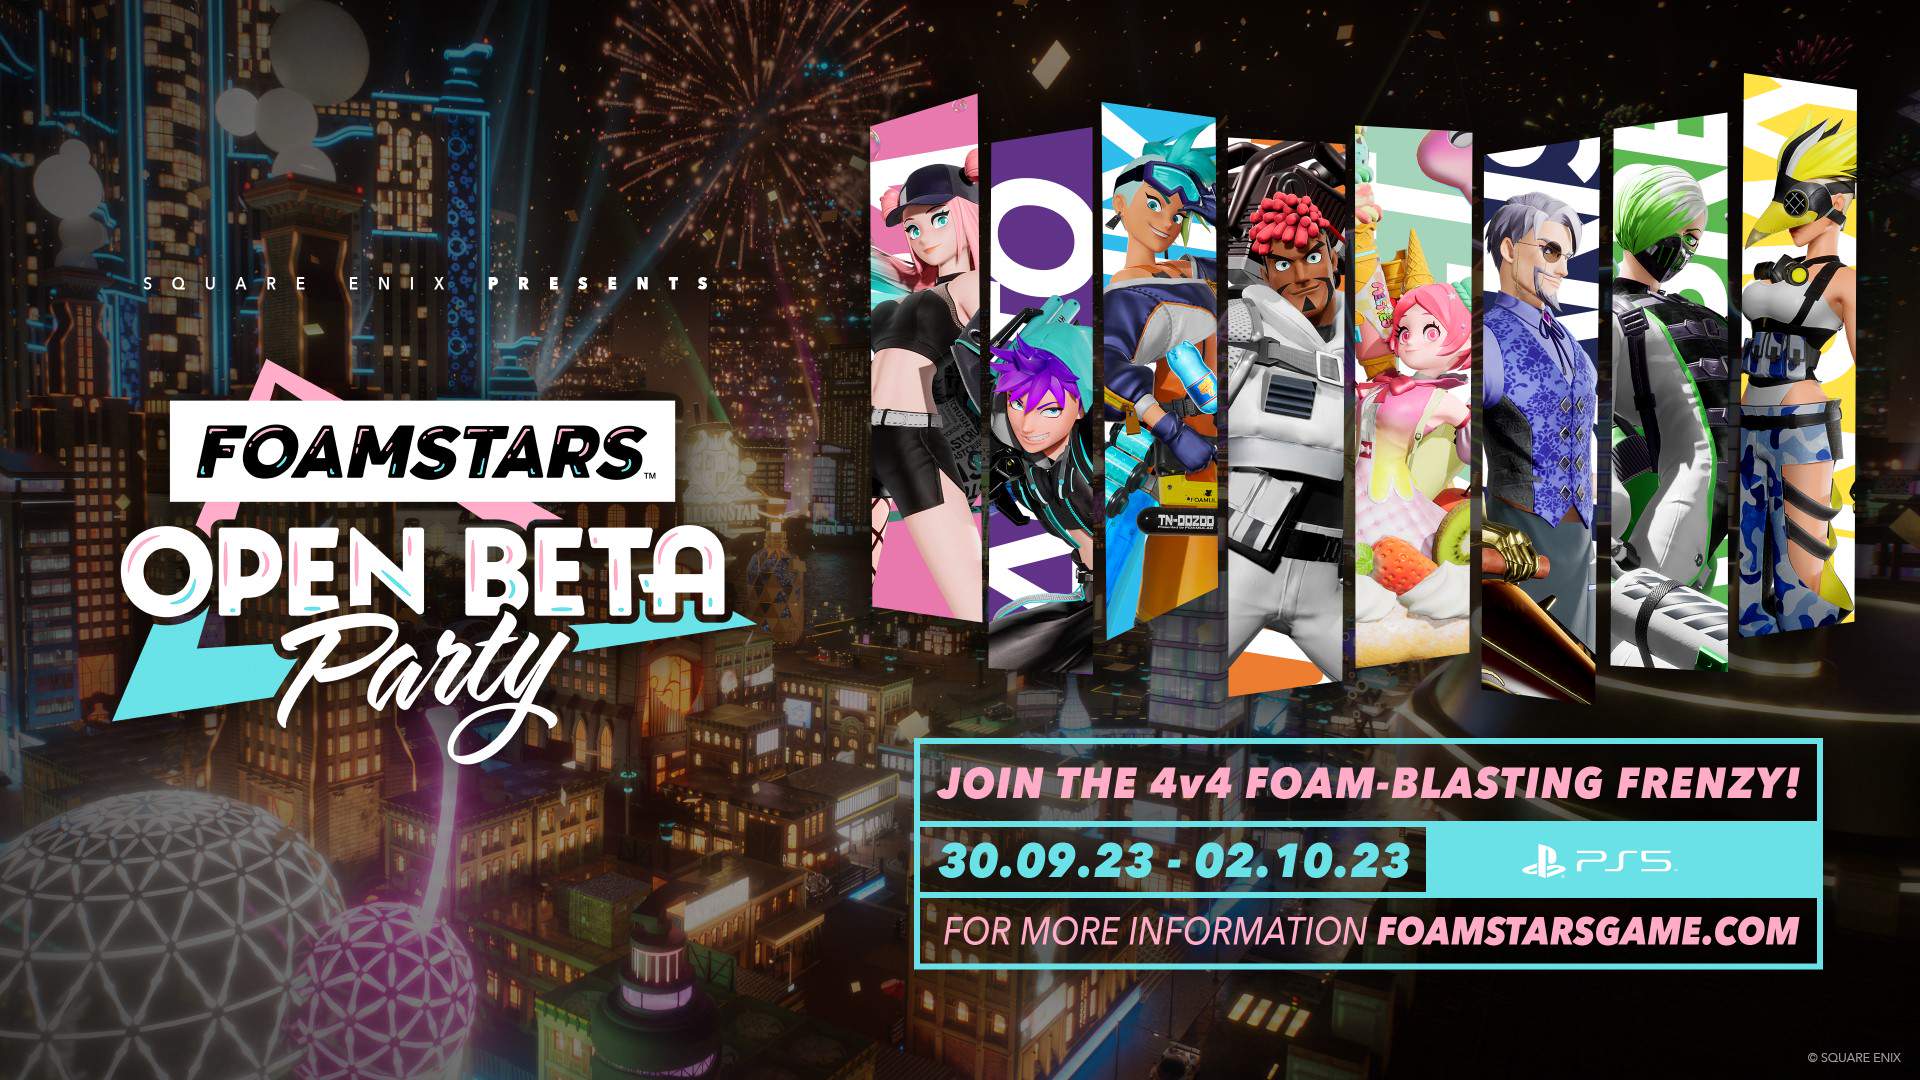 FOAMSTARS OPEN BETA PARTY flyer invitation featuring the eight FOAMSTARS characters